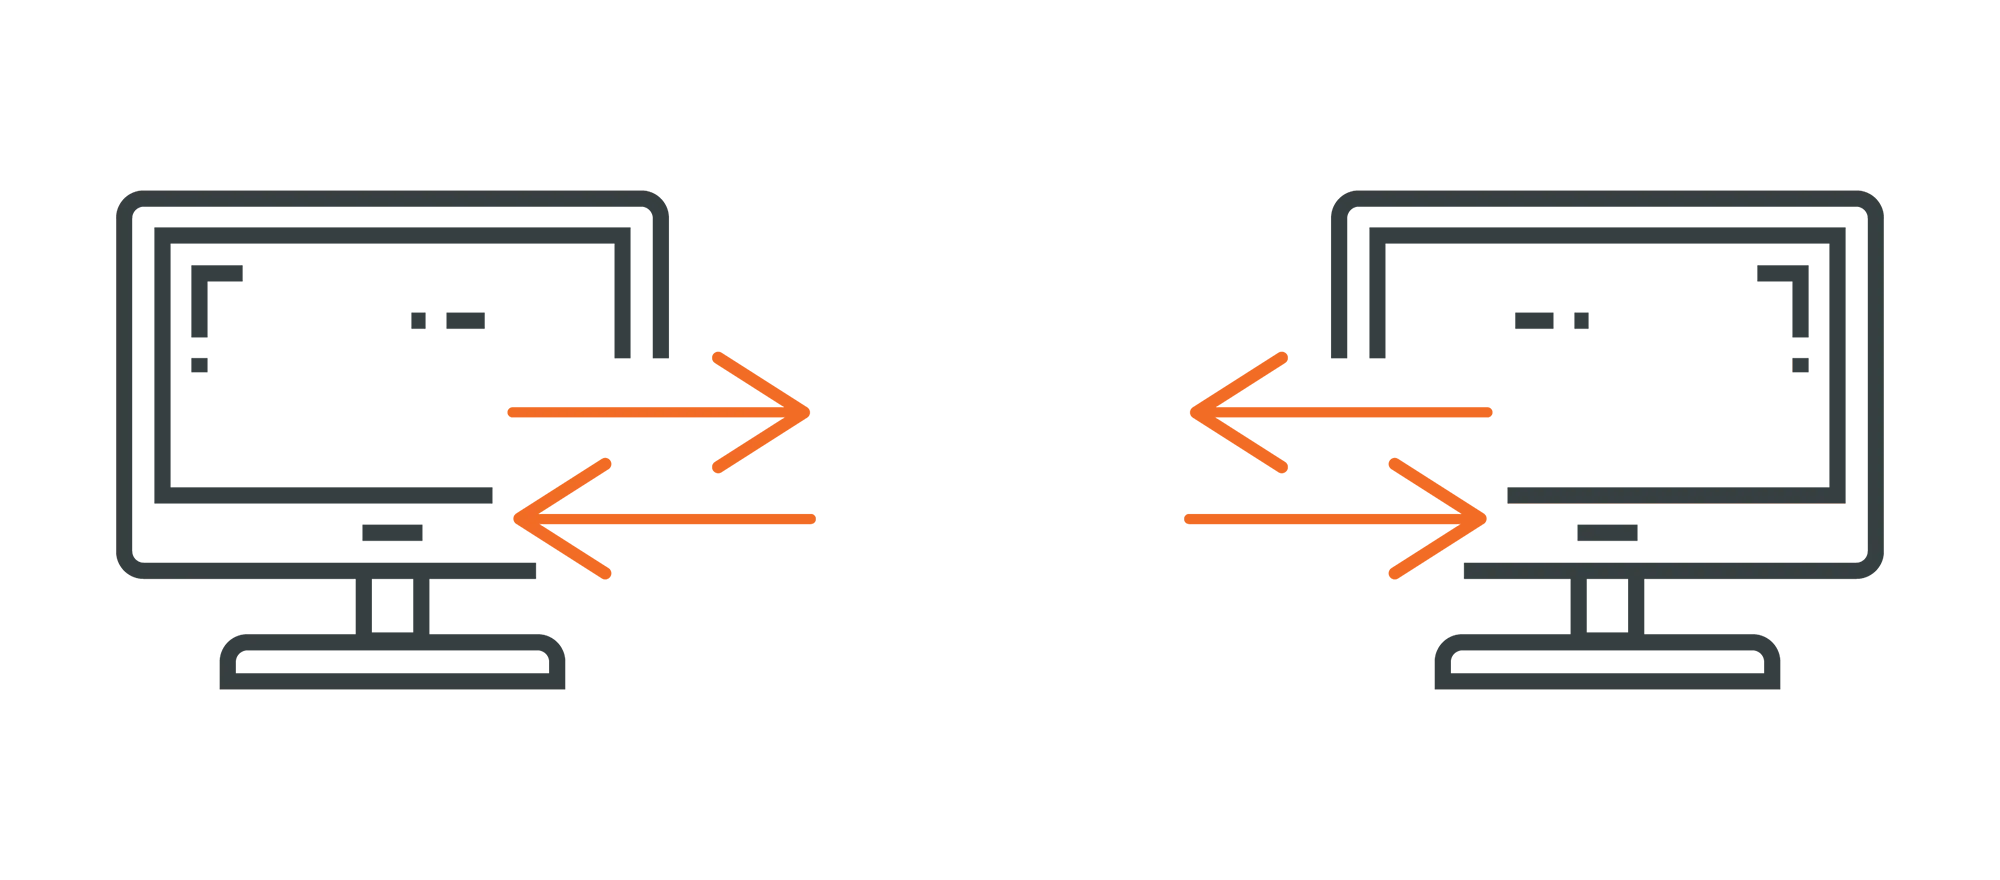 An icon depicting two laptops communicating with each other. This is illustrated with multiple arrows pointing between the devices.